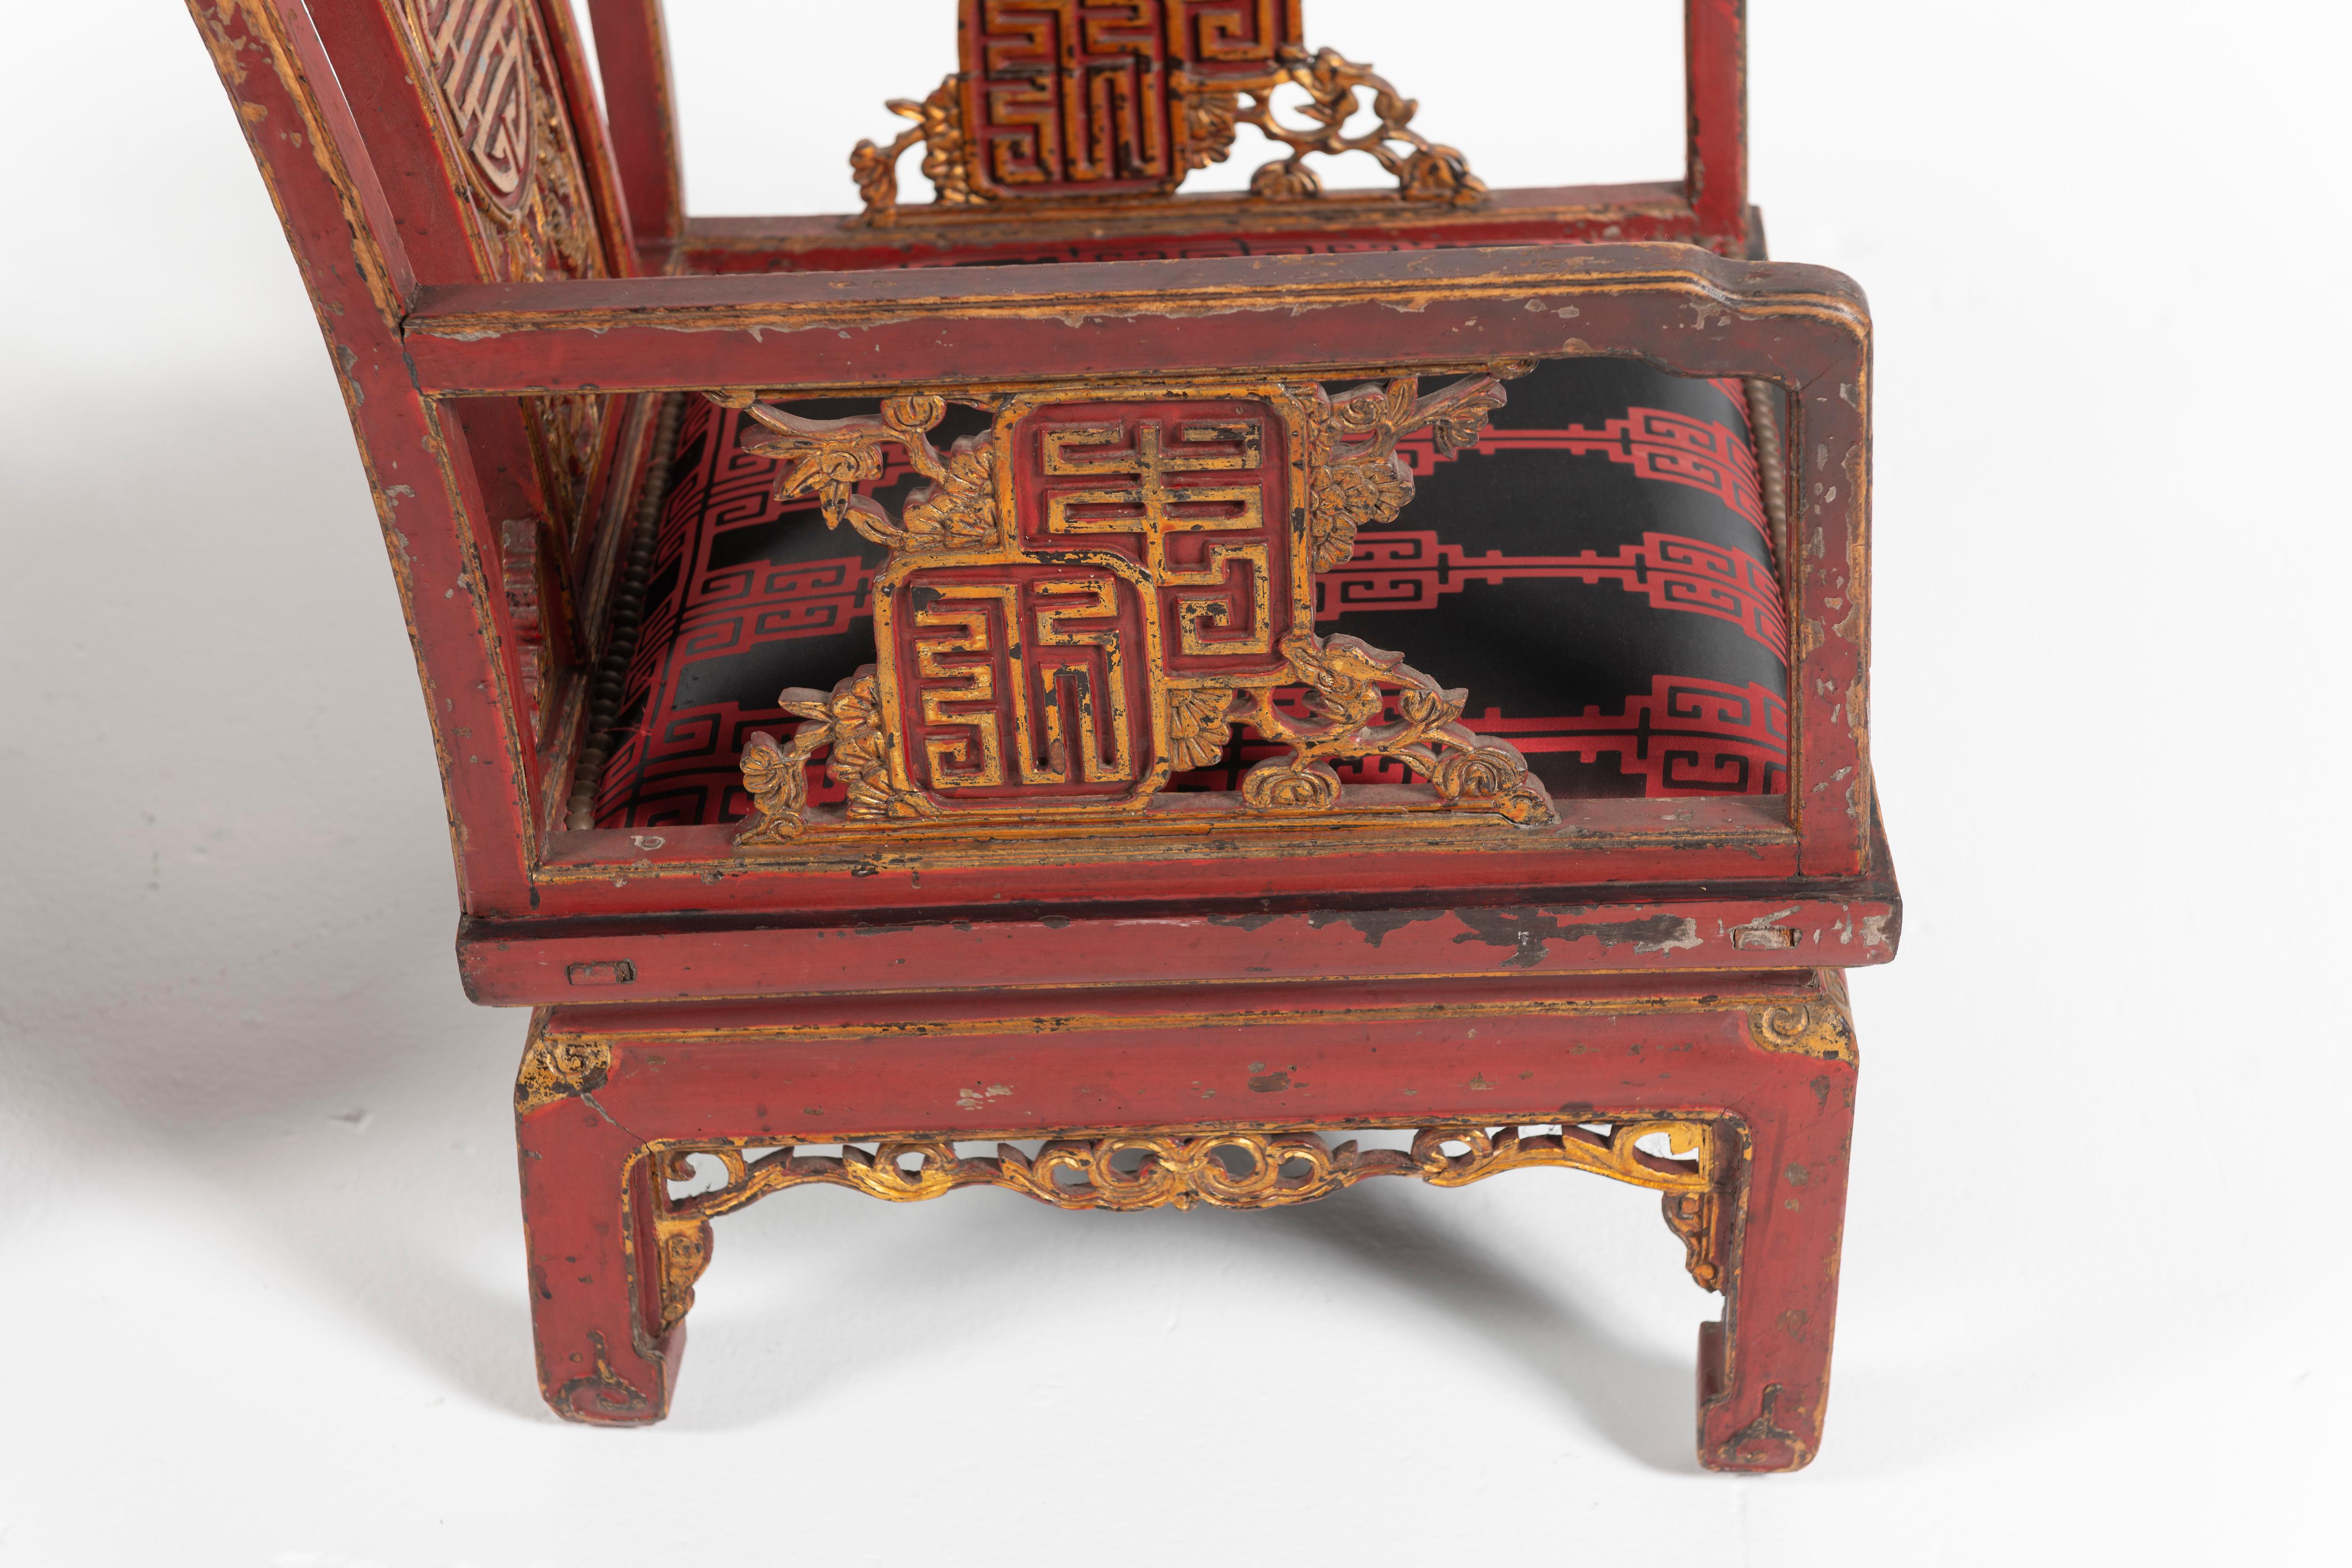 Pair of Antique French Chinoiserie Armchairs, Red and Gold Lacquer, 19th Century For Sale 2